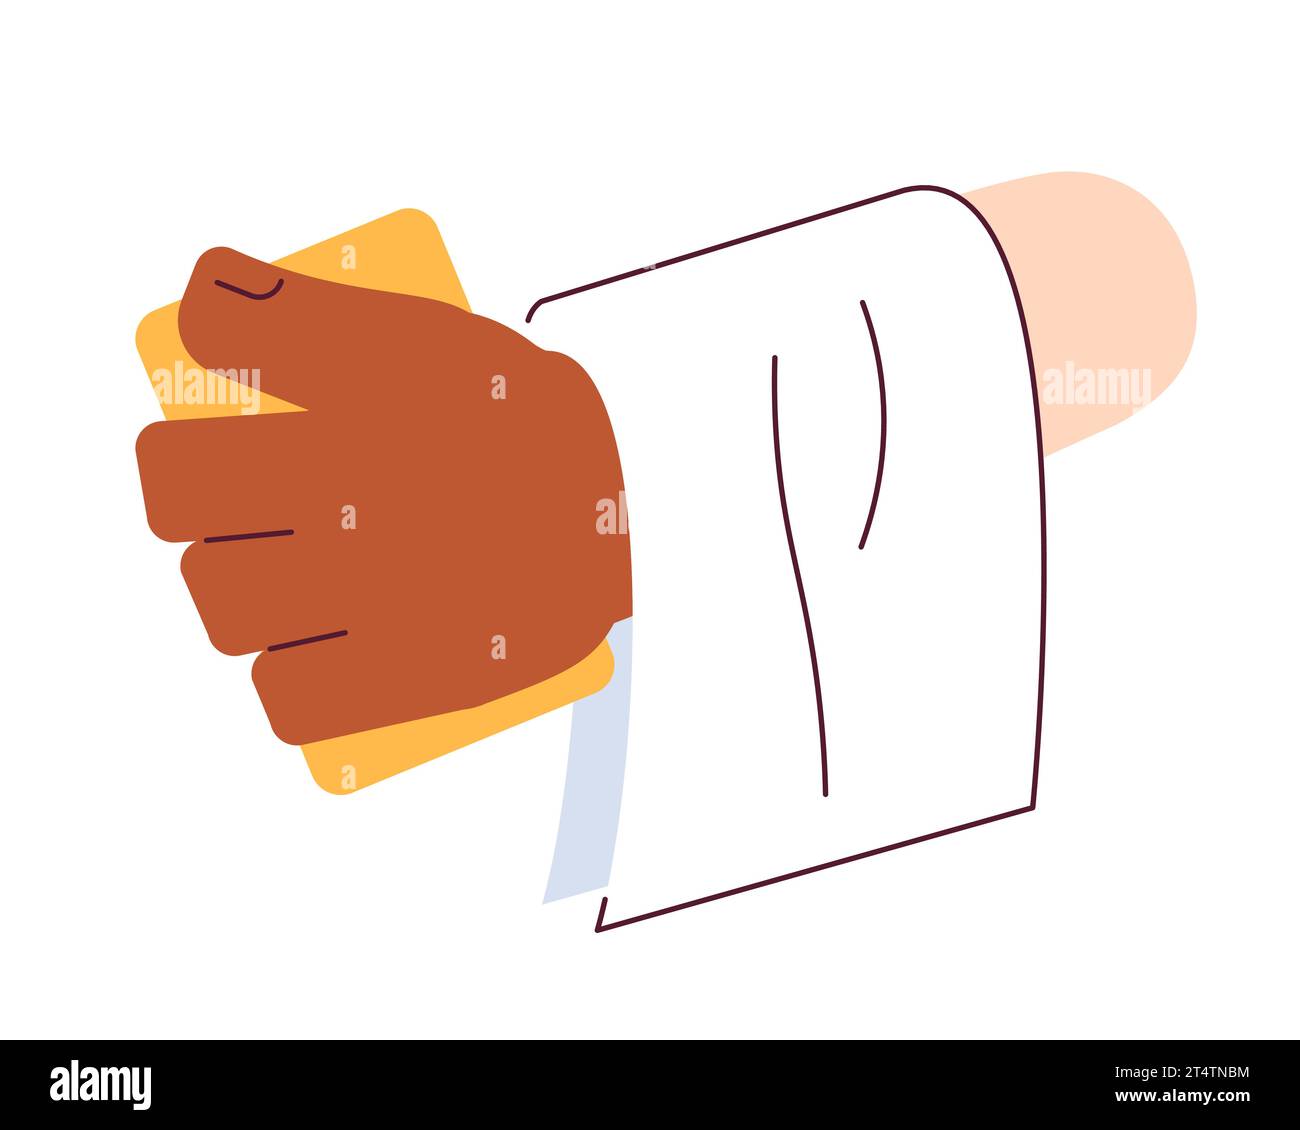 Holding menu and table cloth cartoon character hand illustration Stock Vector